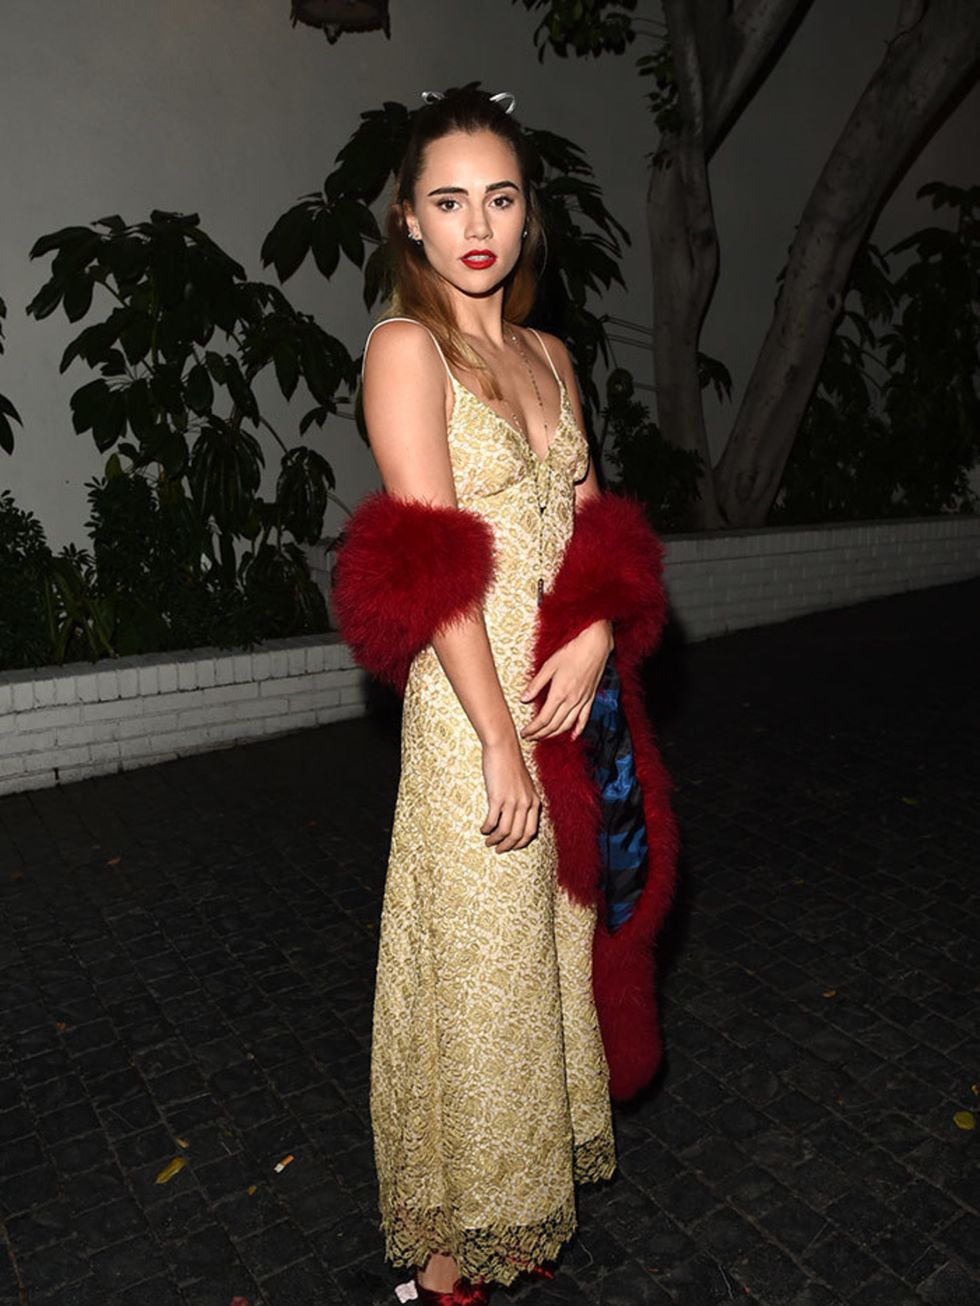 Suki Waterhouse attends the W Magazine celebration of the 'Best Performances' Portfolio at Chateau Marmont in Los Angeles, January 2016.